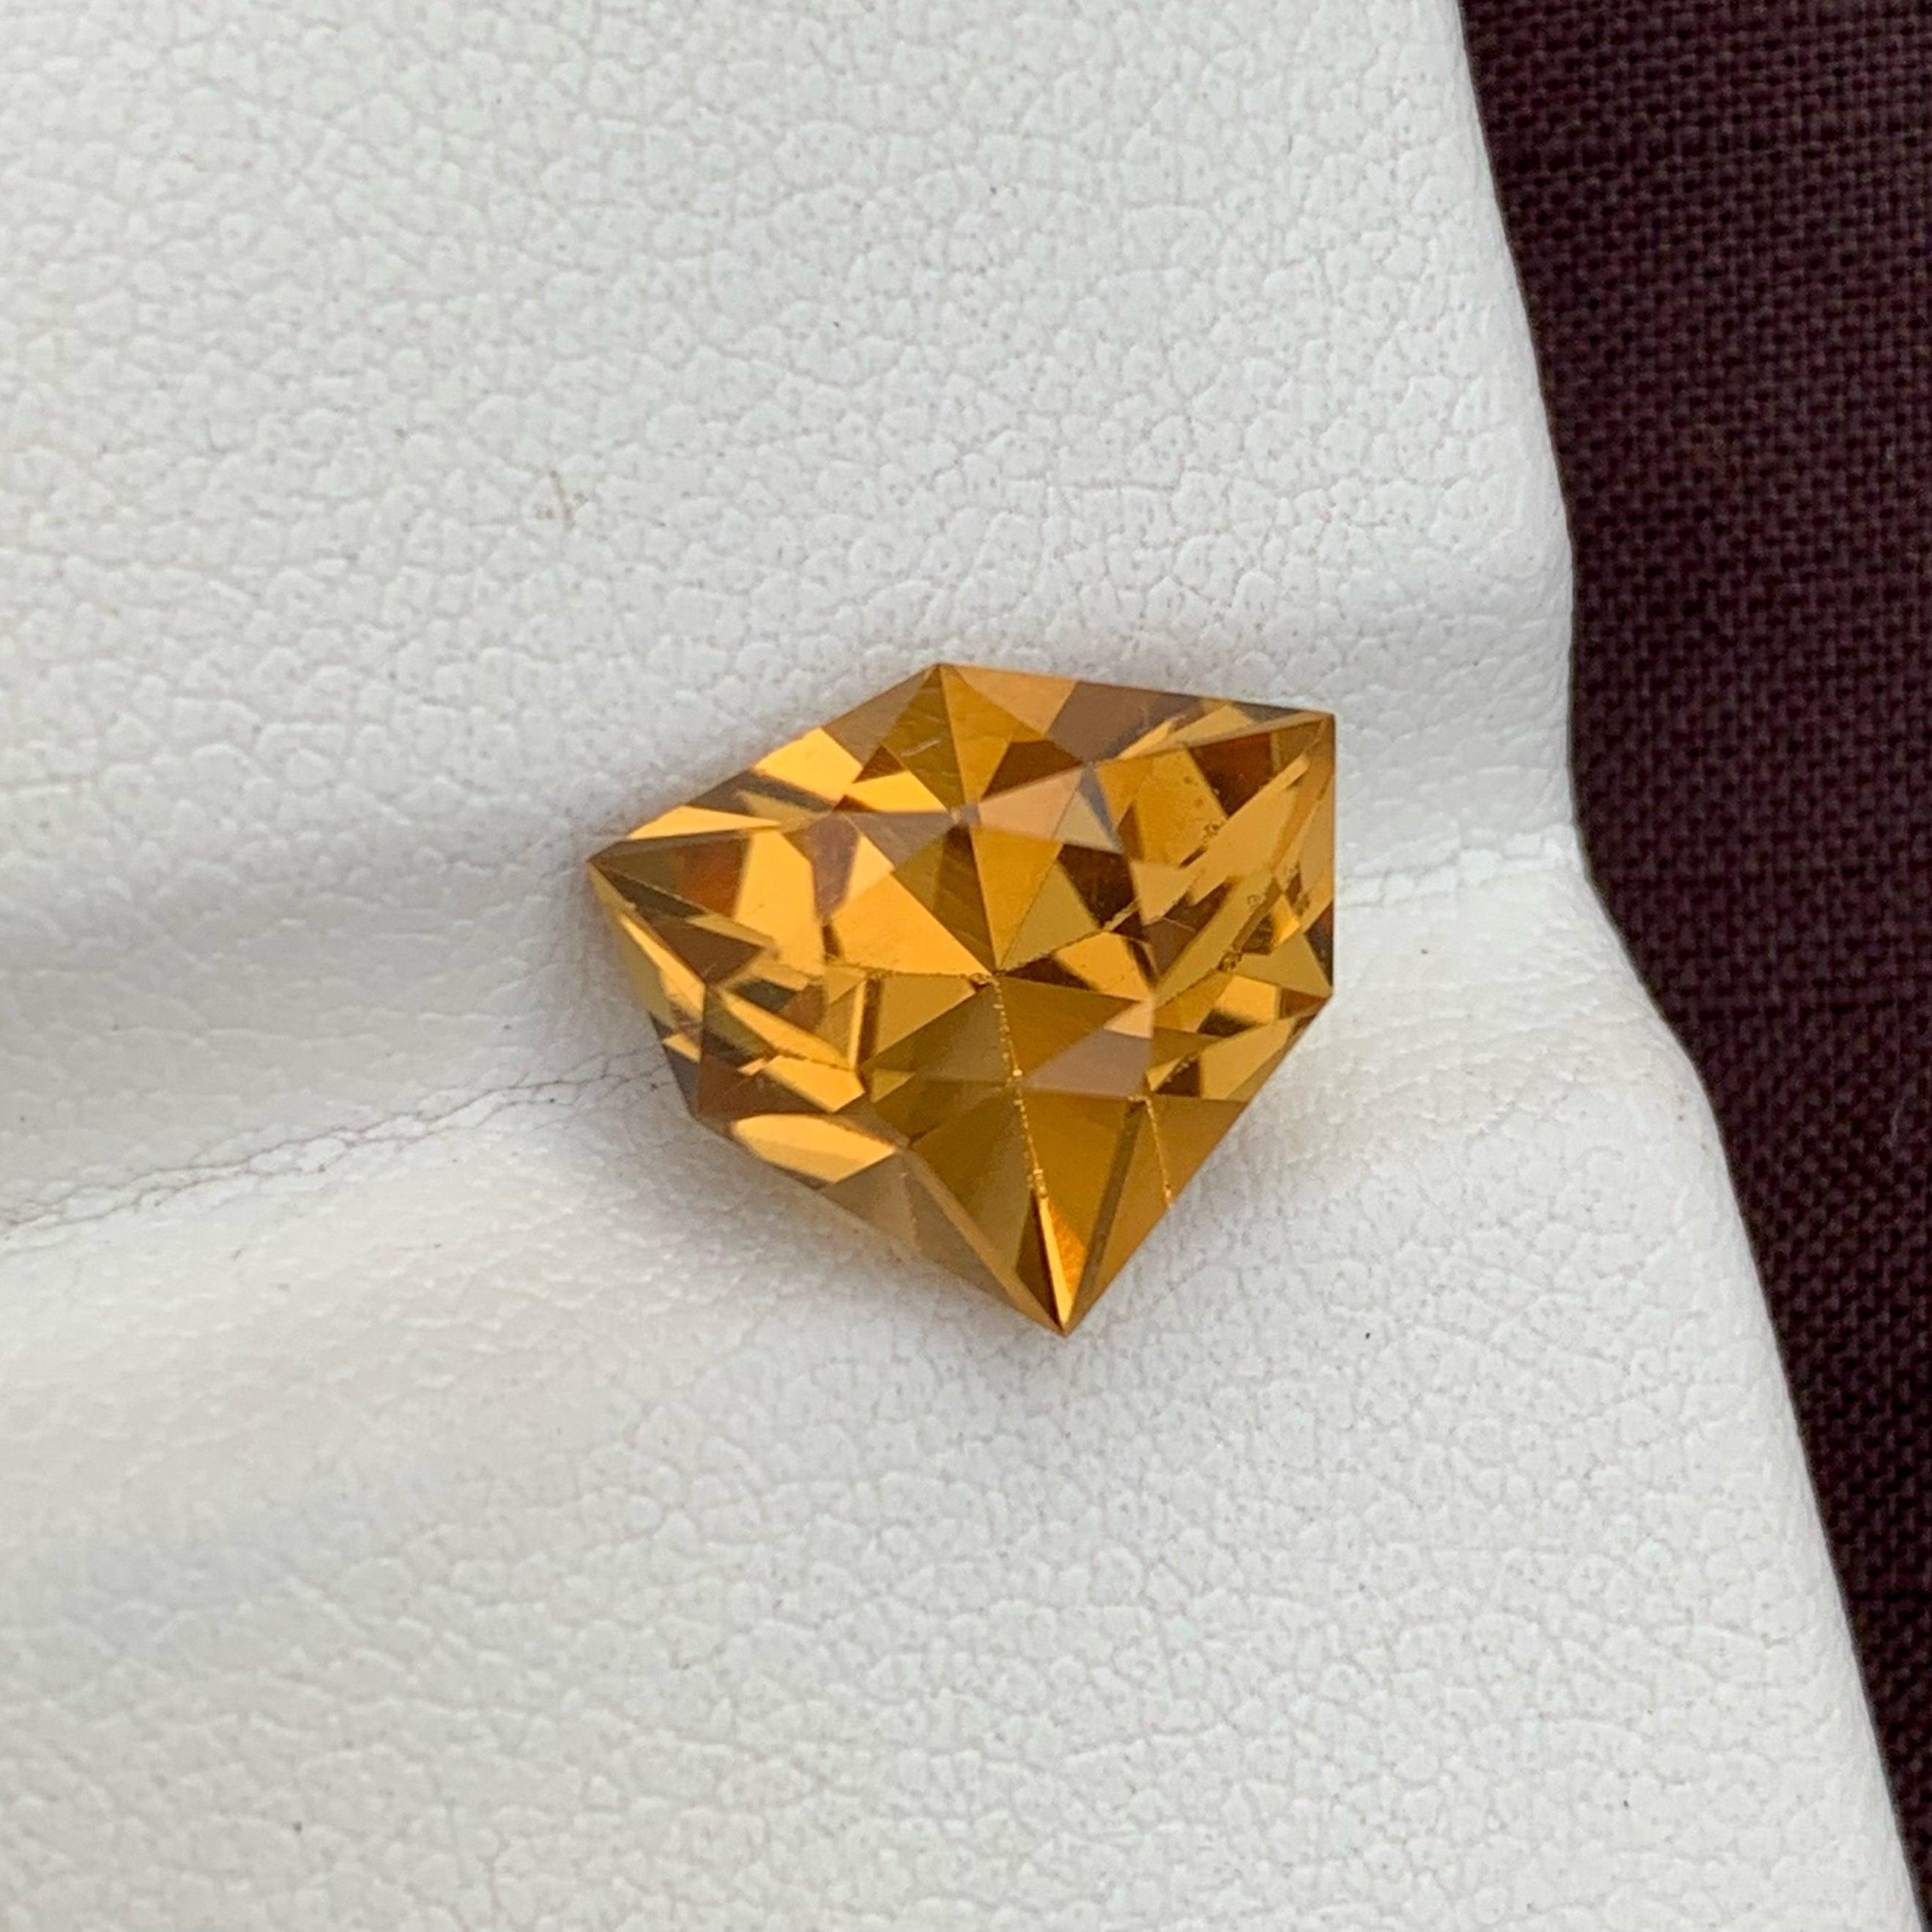 Stunning Deep Yellow Loose Citrine Gemstone, available for sale at wholesale price natural high quality 4.50 Carats loose citrine from brazil.

Product Information:
GEMSTONE TYPE:	Stunning Deep Yellow Loose Citrine Gemstone
WEIGHT: 4.50